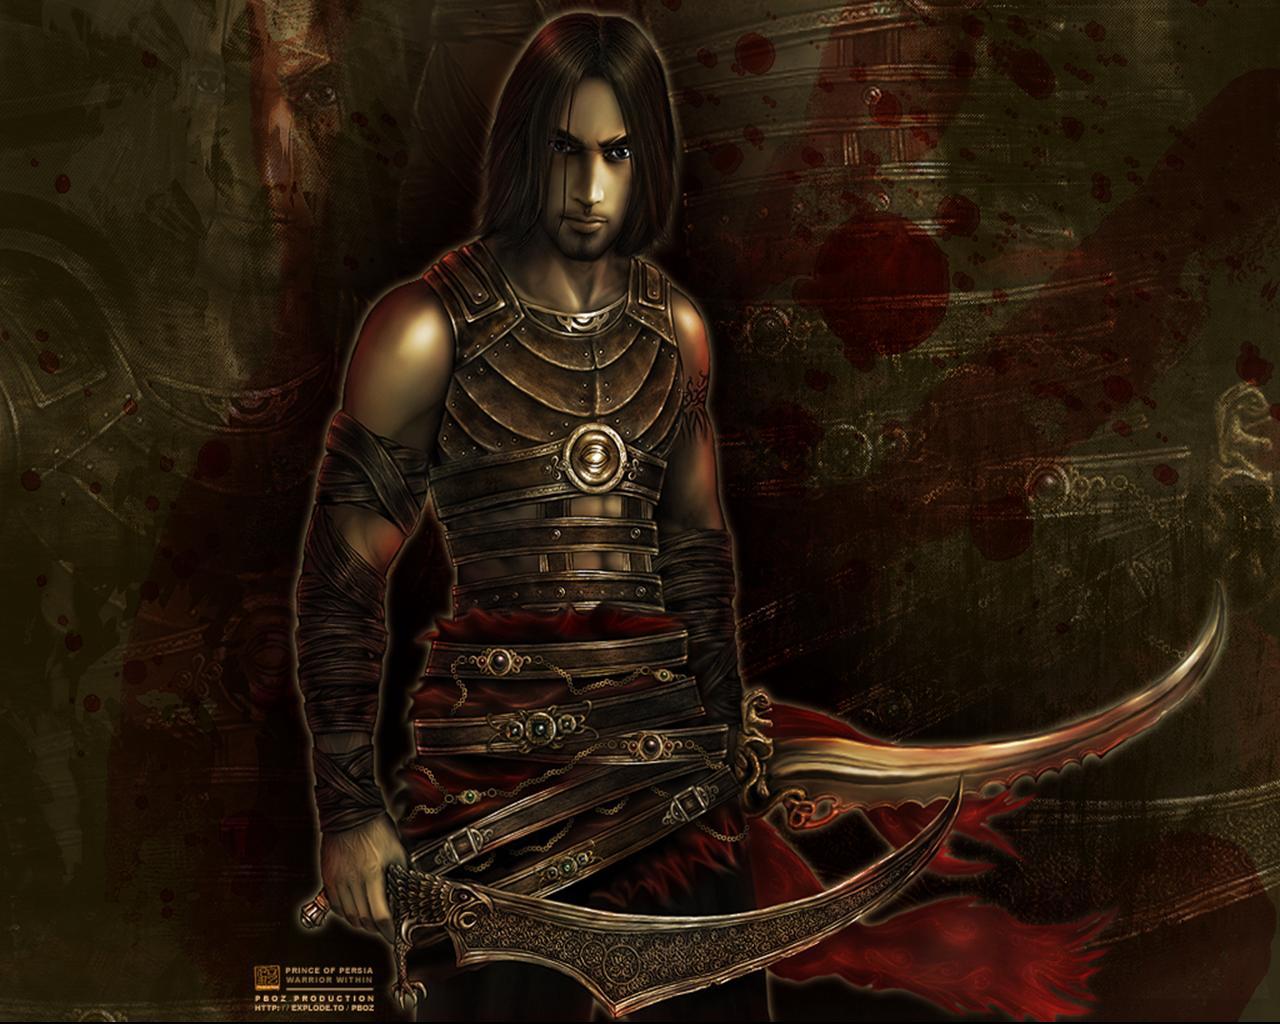 Wallpaper Prince of Persia Prince of Persia: Warrior Within Games